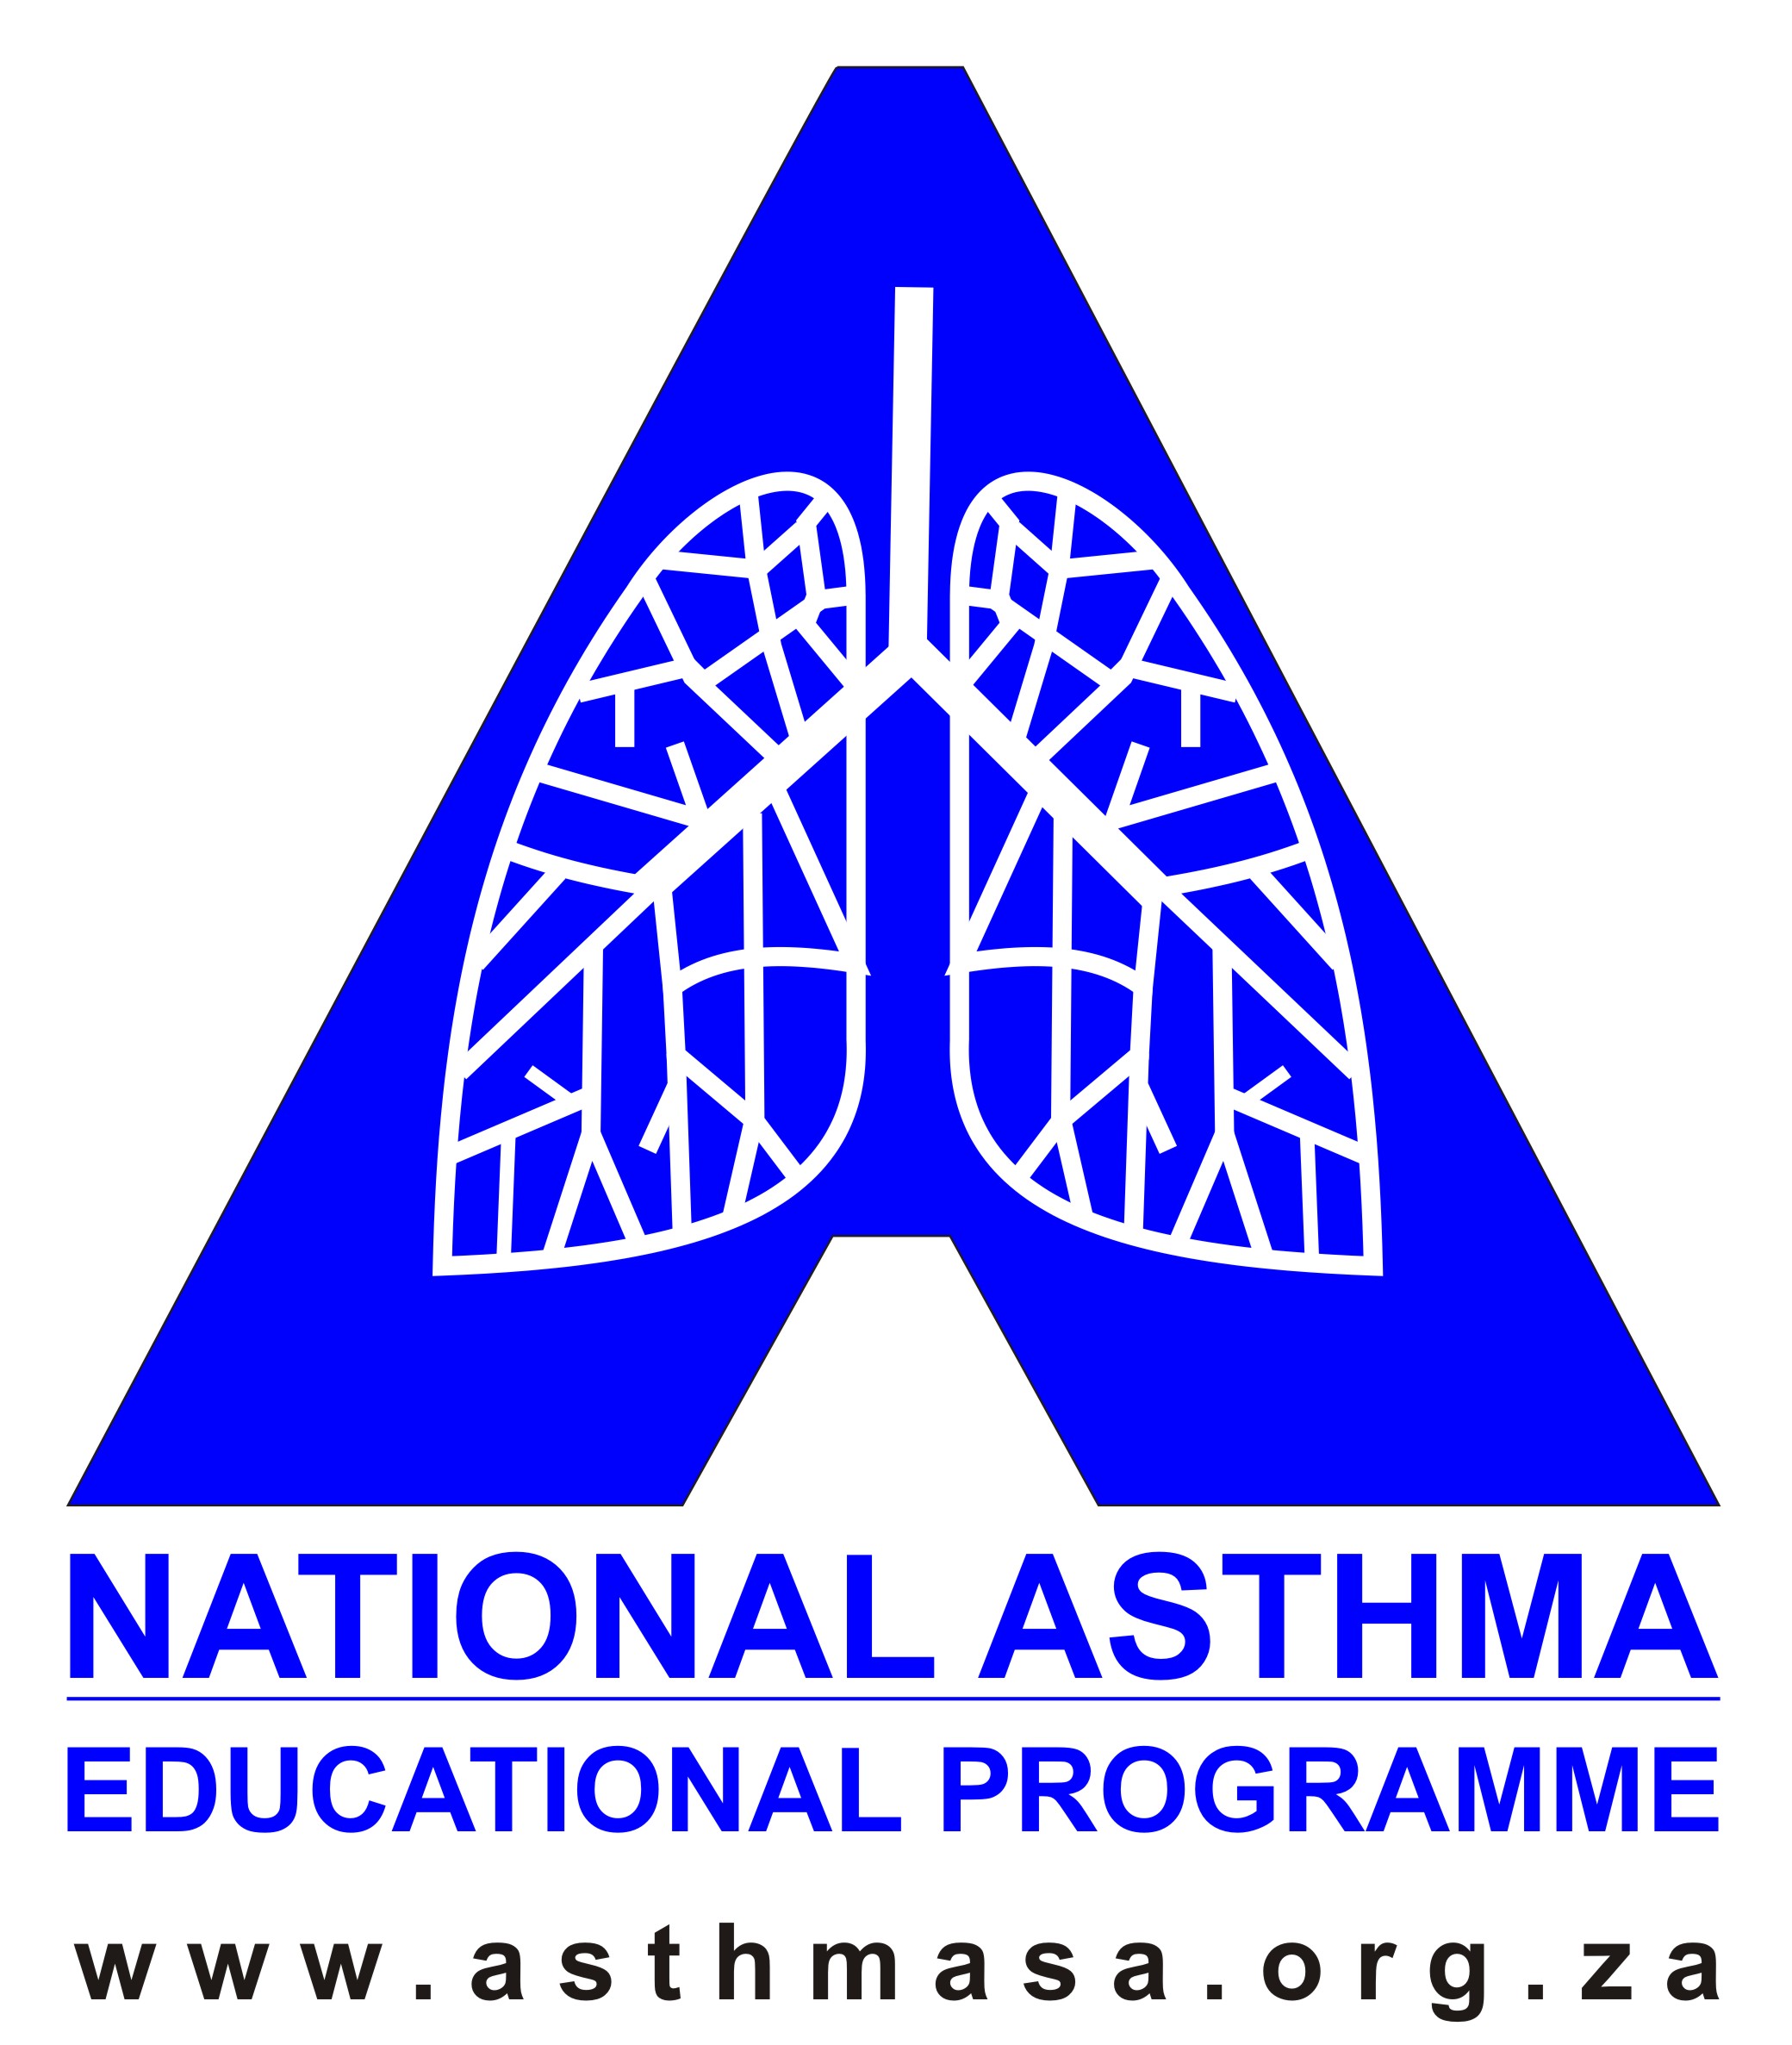 National Asthma Education Programme